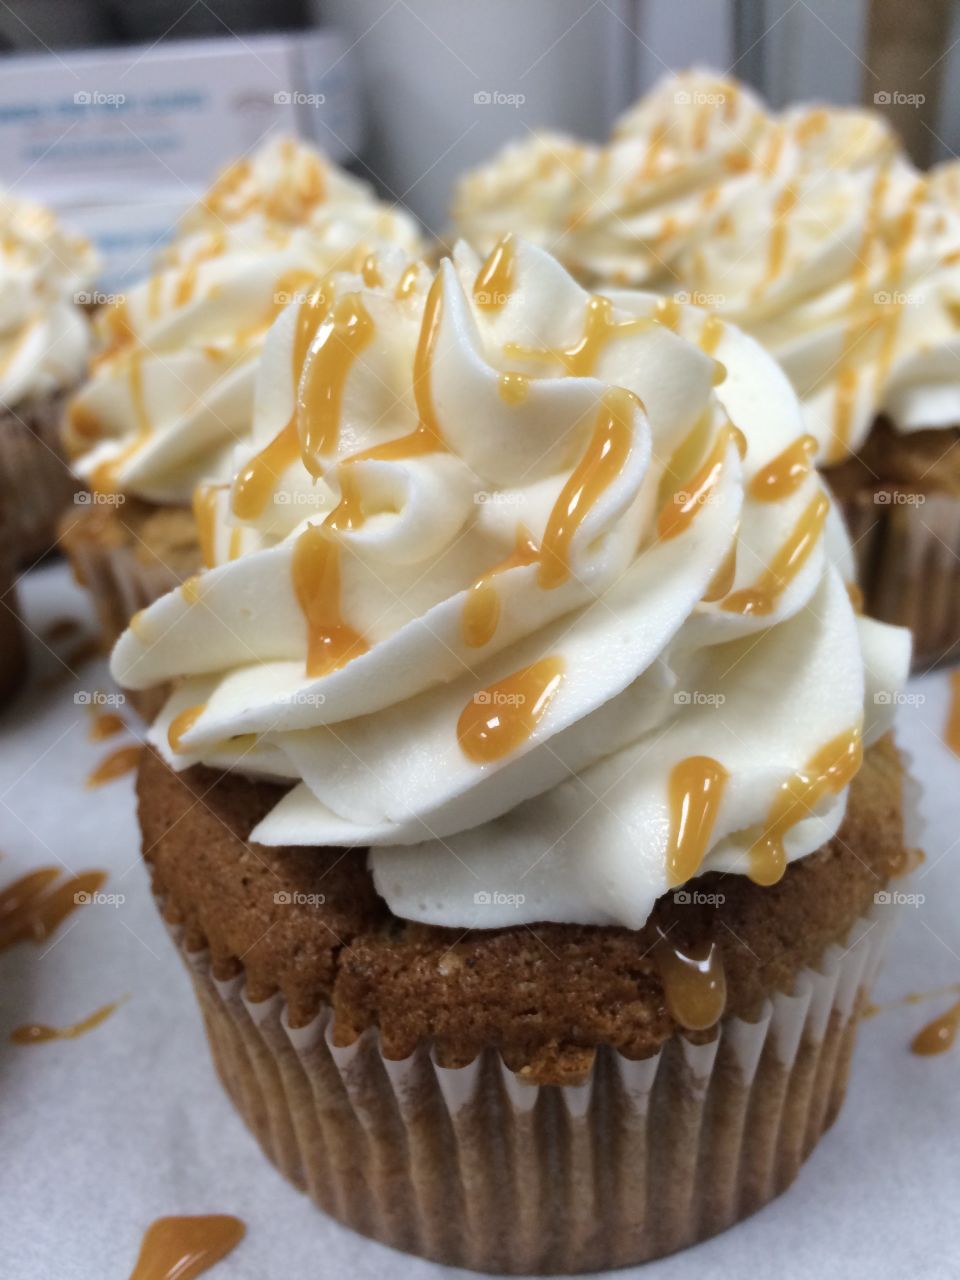 Caramel apple cupcakes. A delicious and moist apple cake with light caramel frosting and drizzle